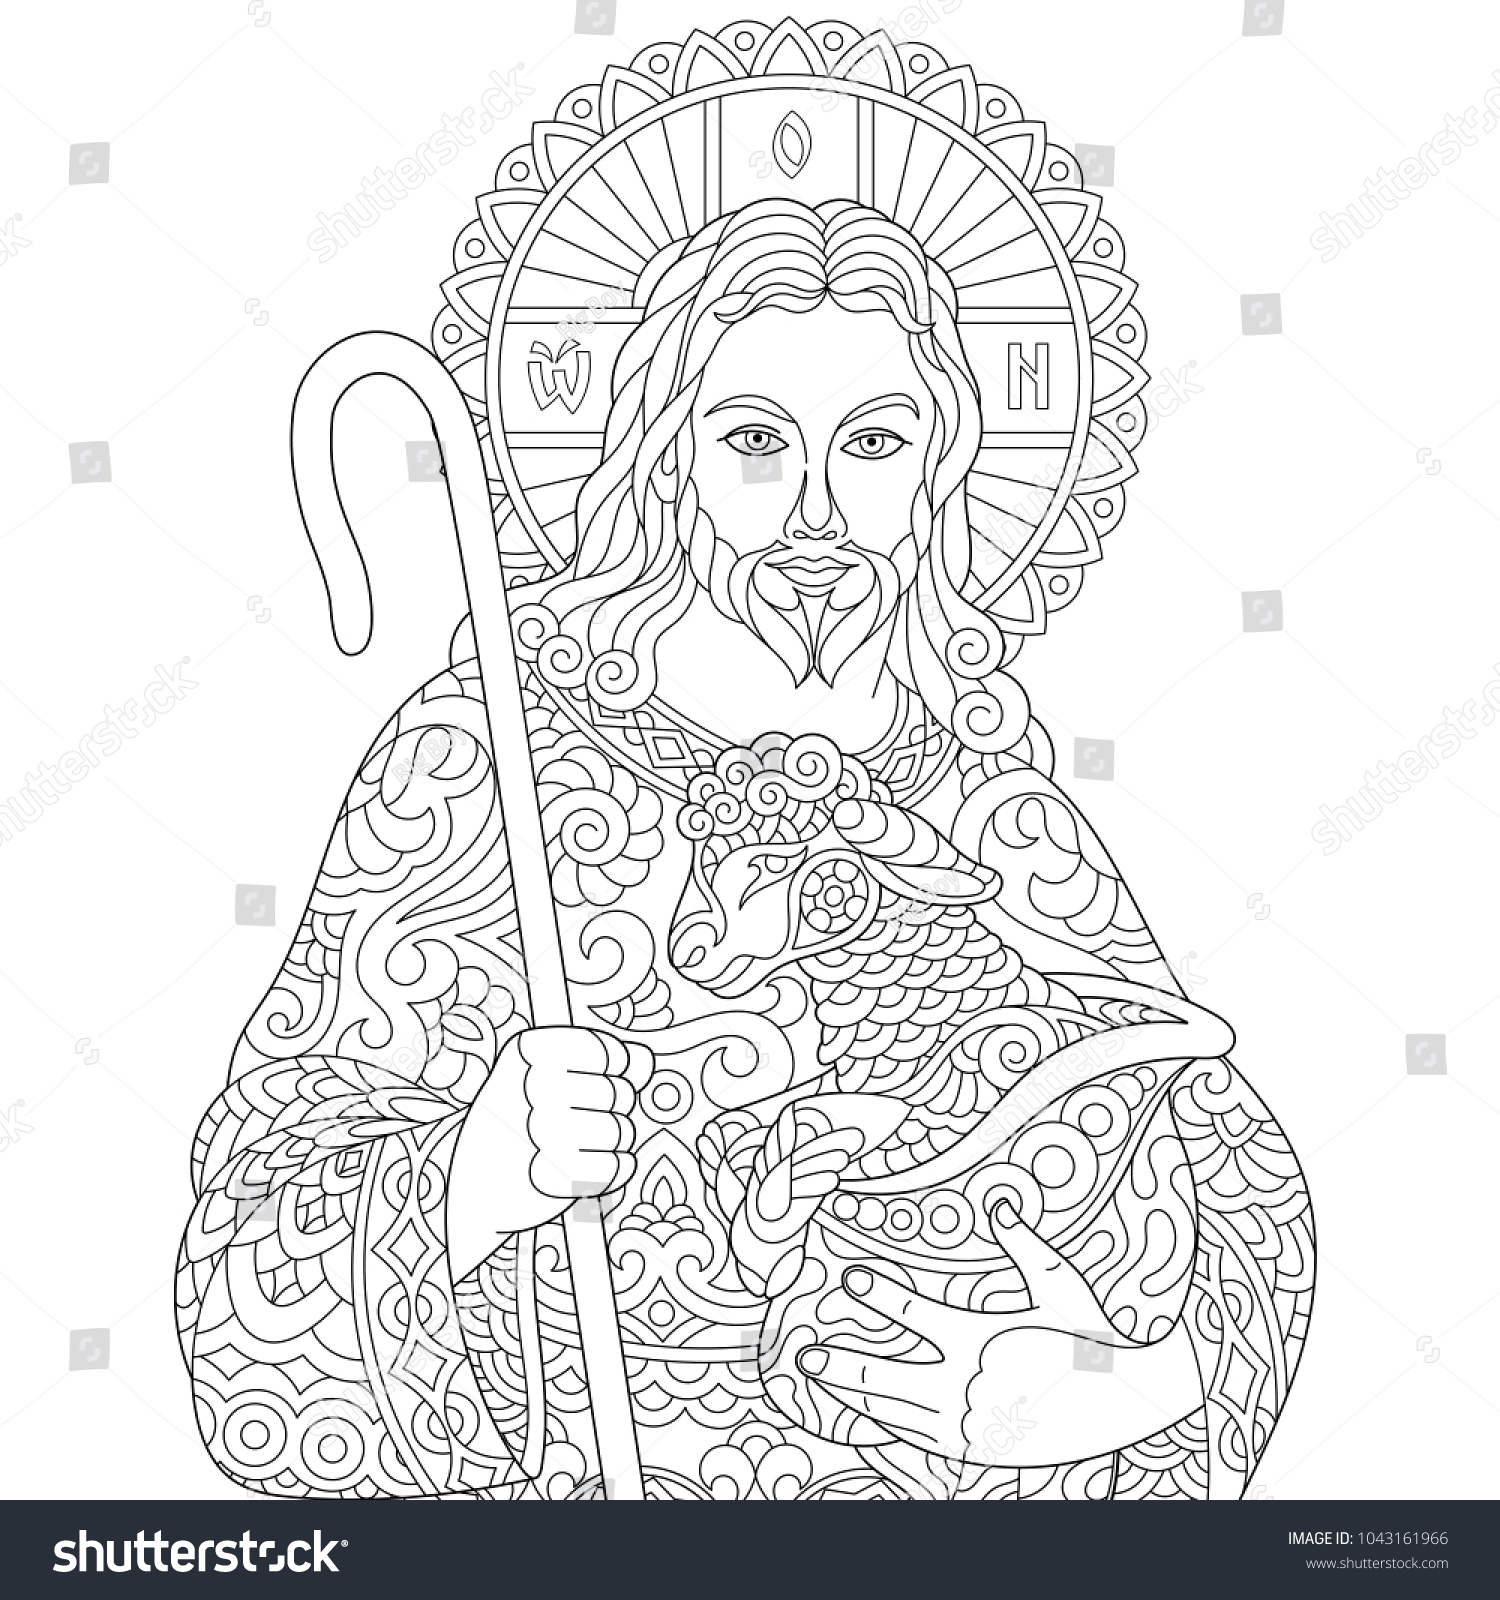 Jesus Christ and newborn Baby Sheep Hand drawn portrait of christian biblical character Coloring